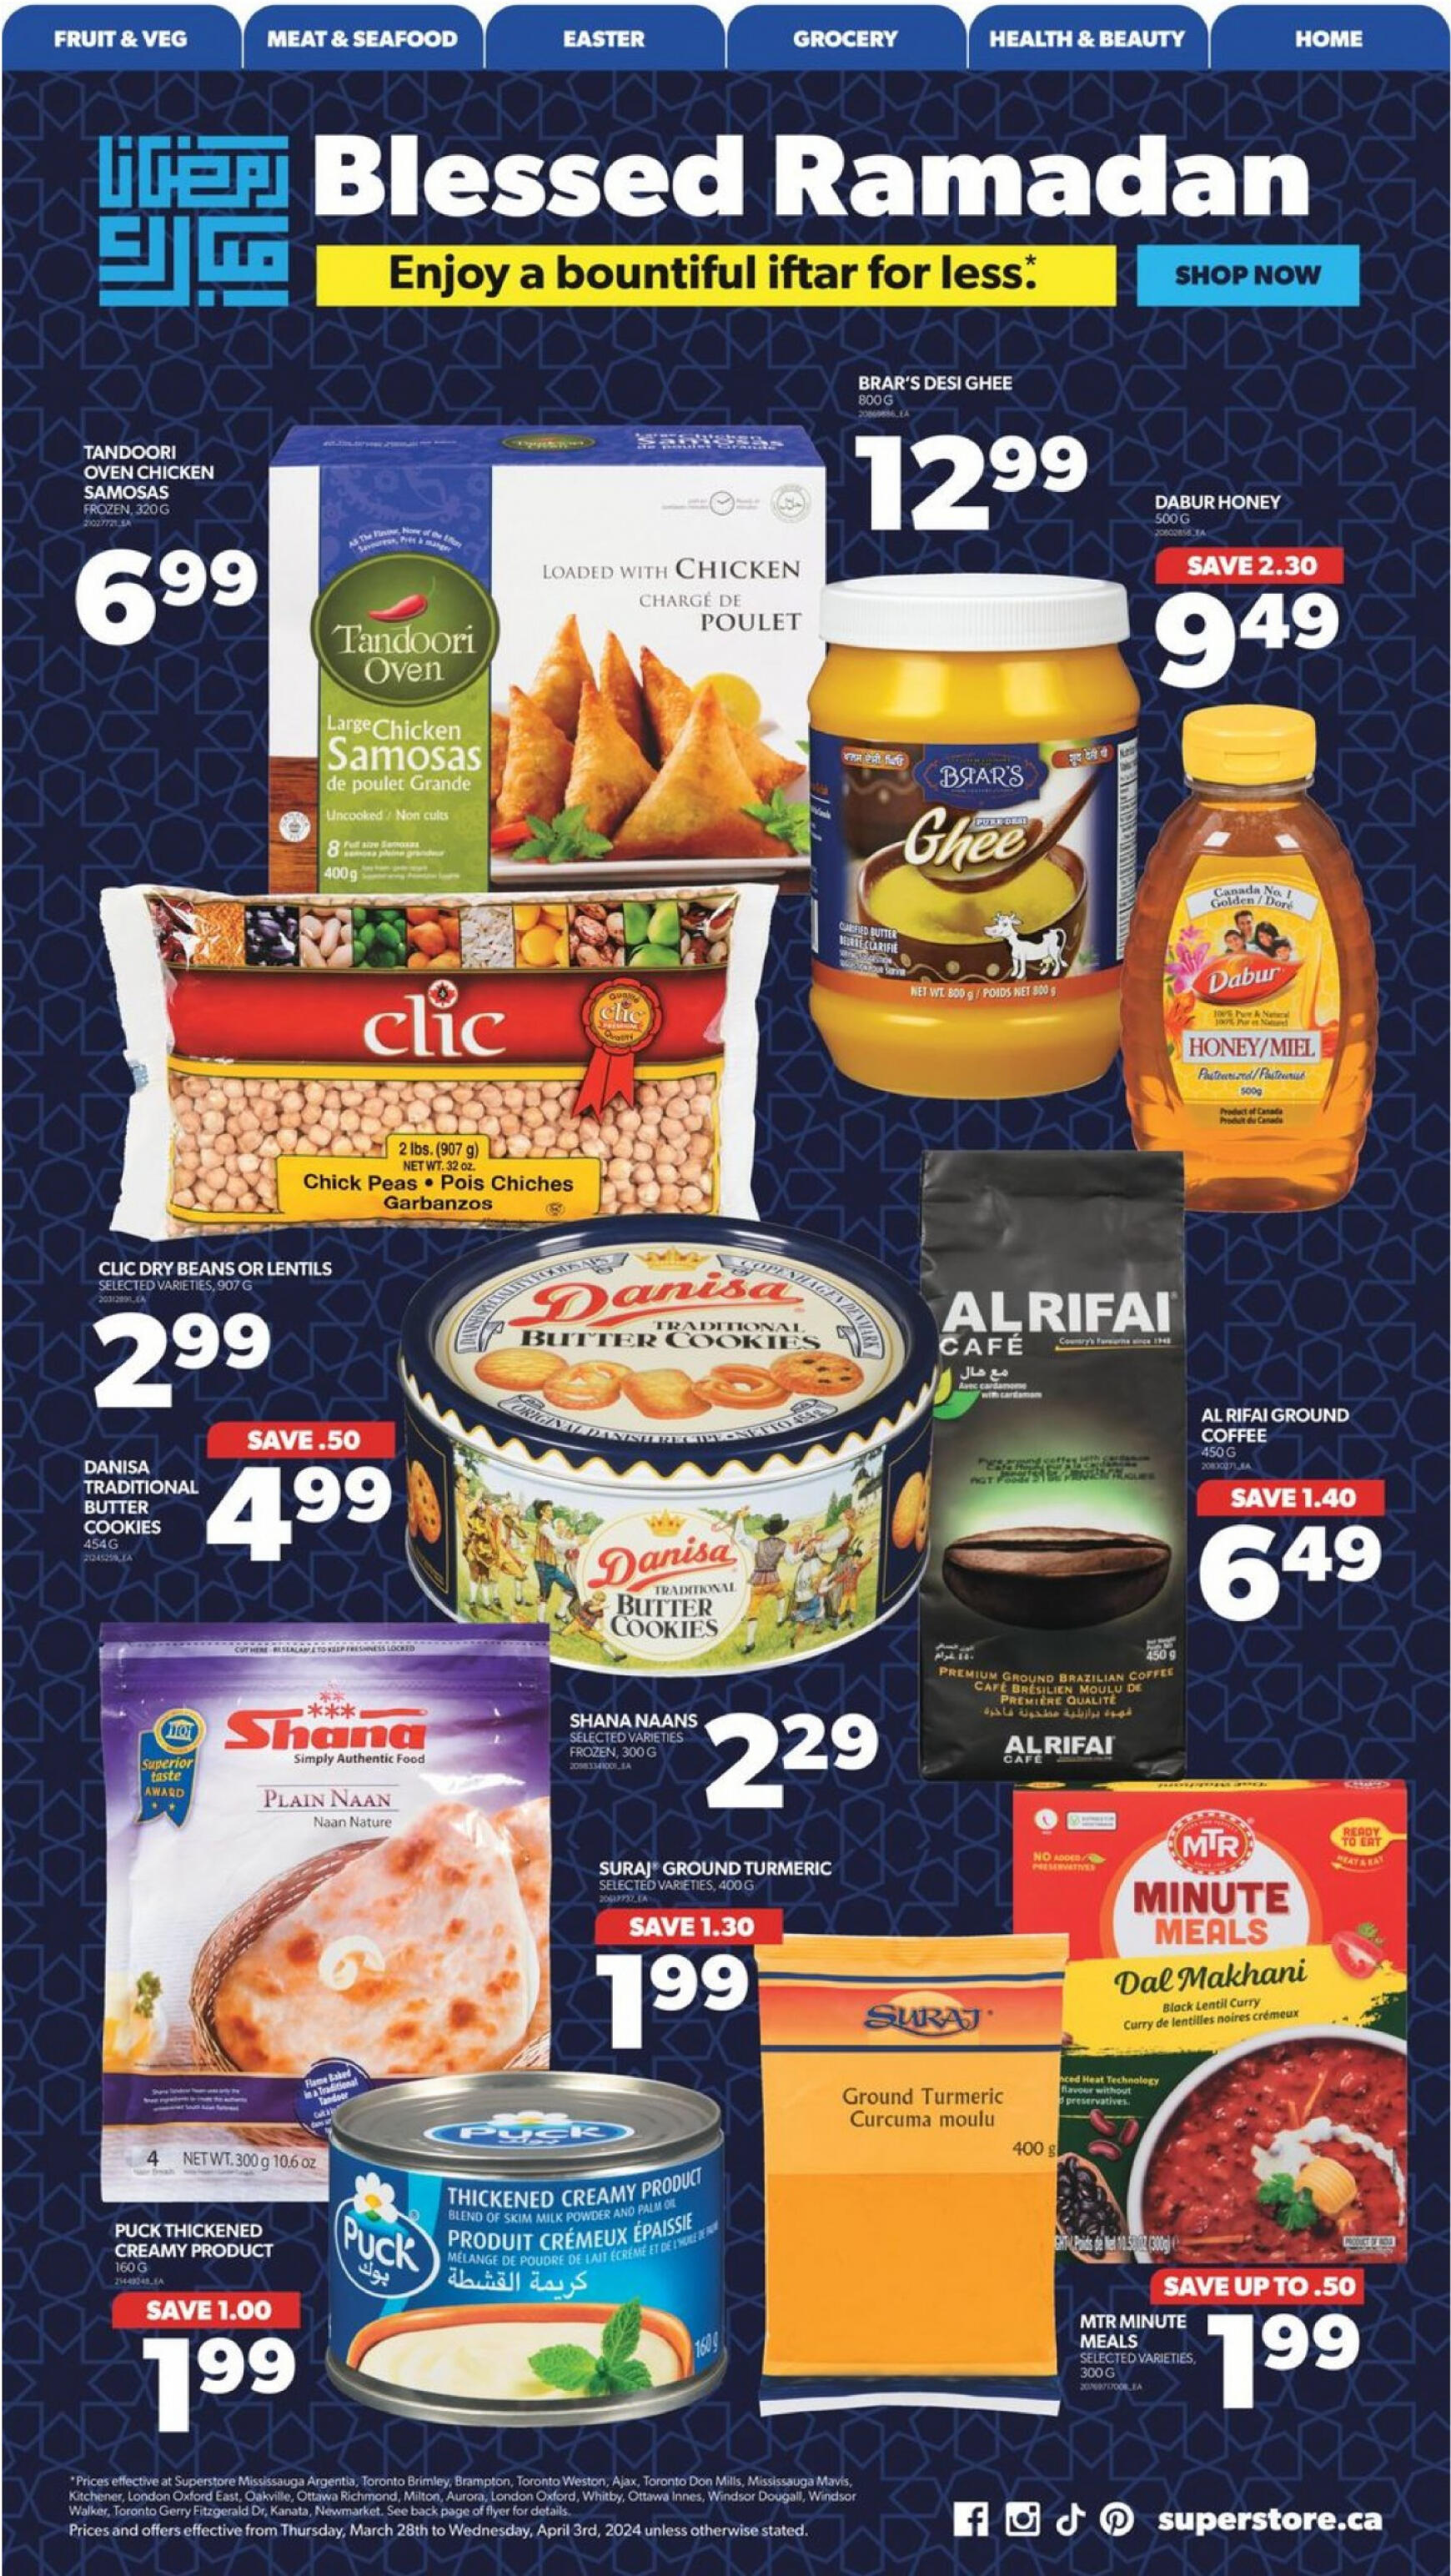 real-canadian-superstore - Real Canadian Superstore flyer current 28.03. - 03.04. - page: 33